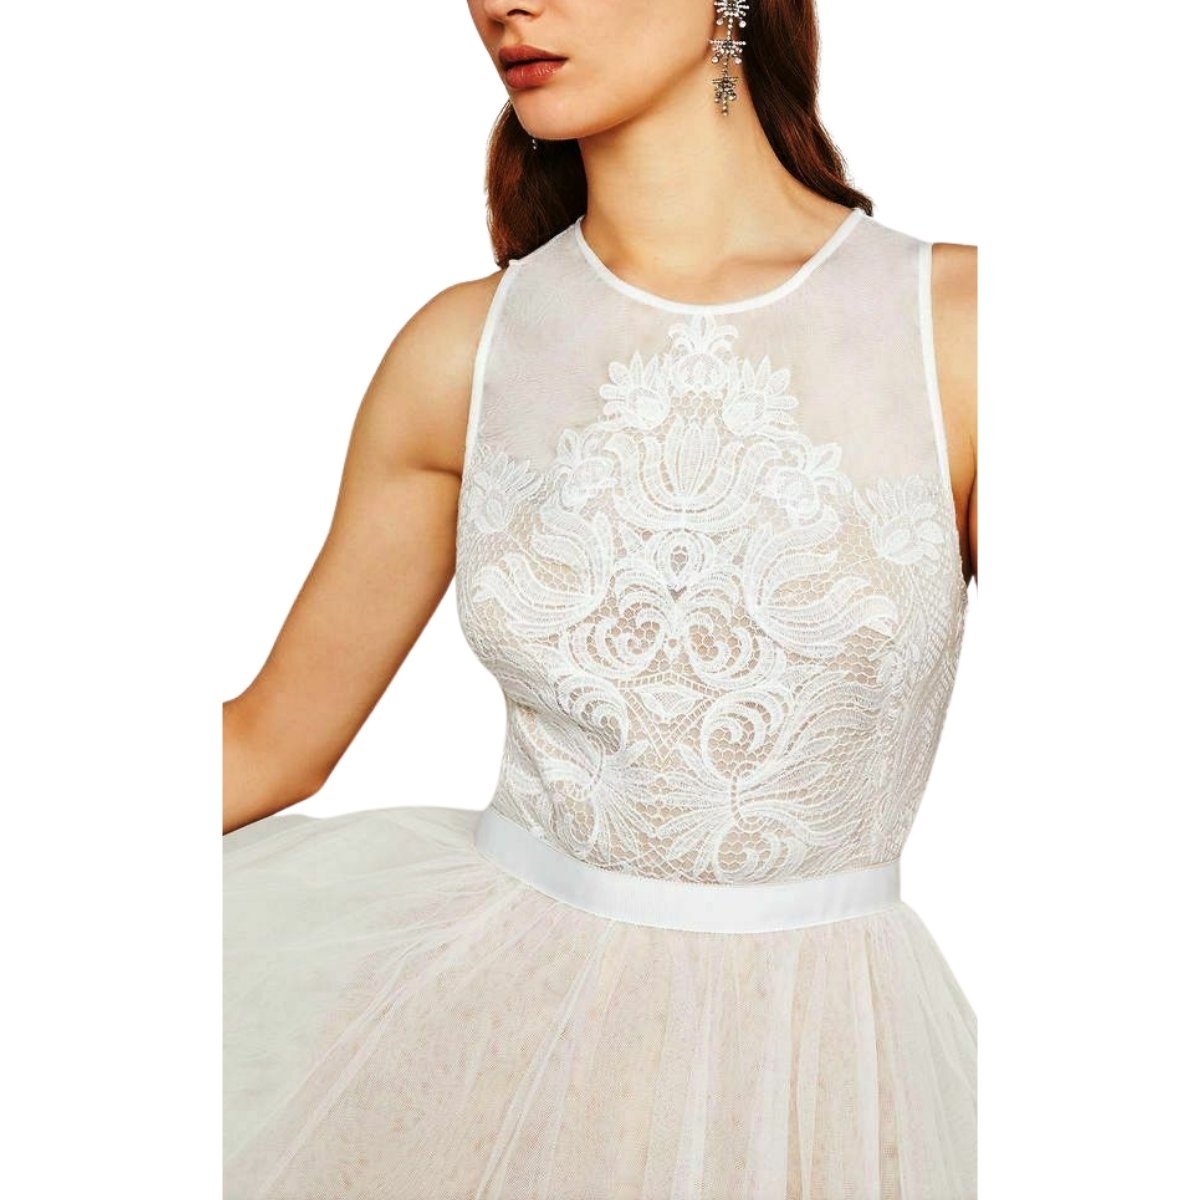 Riese Tulle Applique Dress